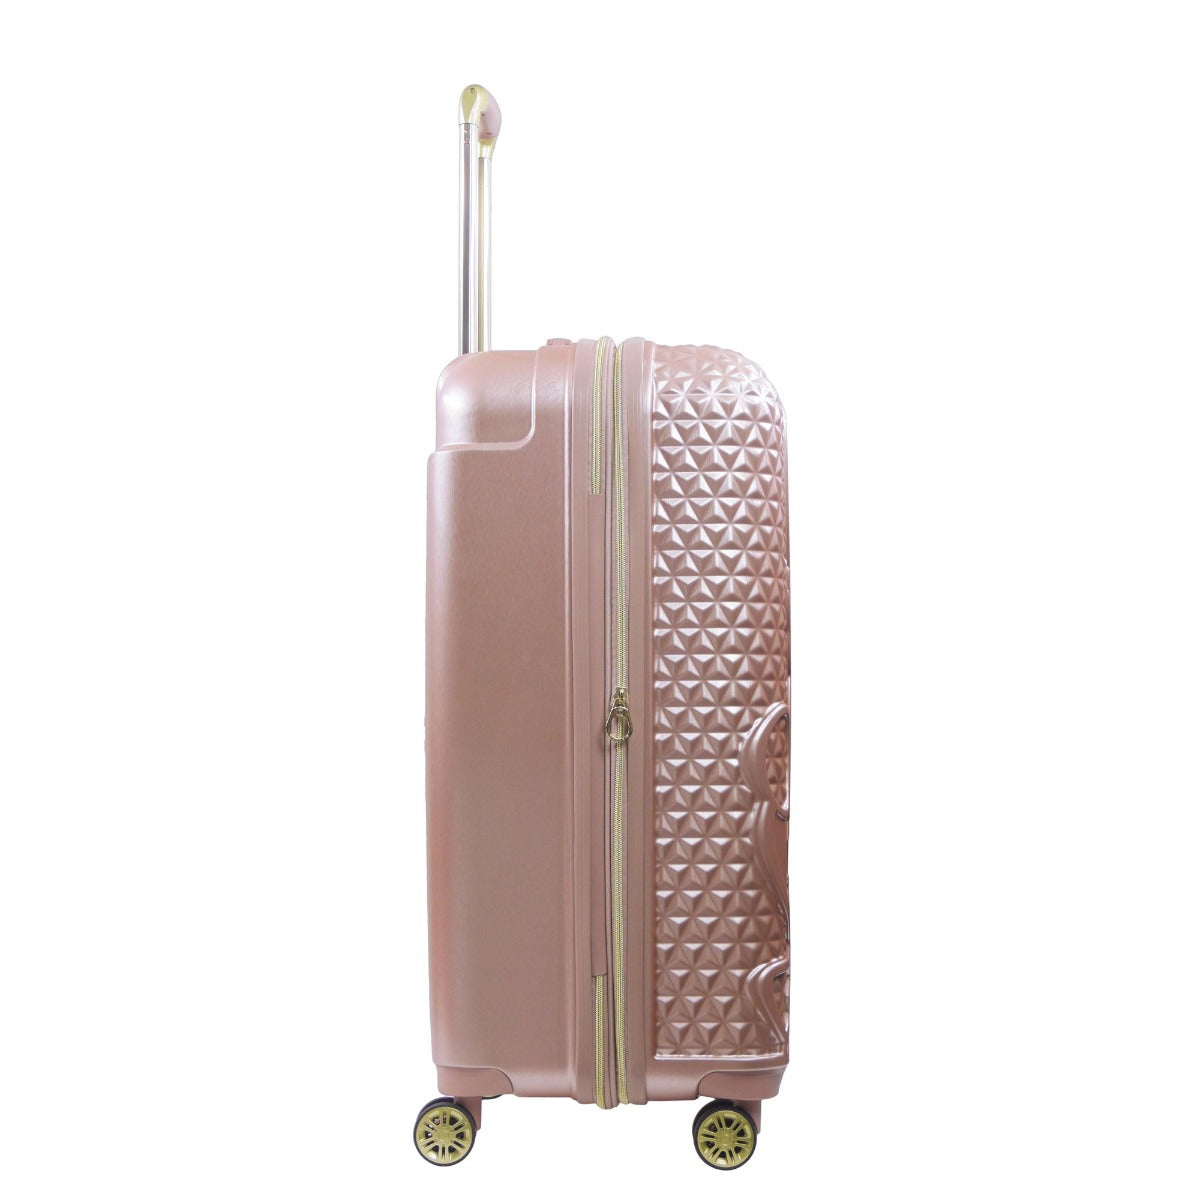 Ful Disney Minnie Mouse 30 inch spinner suitcase rose gold - best check-in luggage for travel